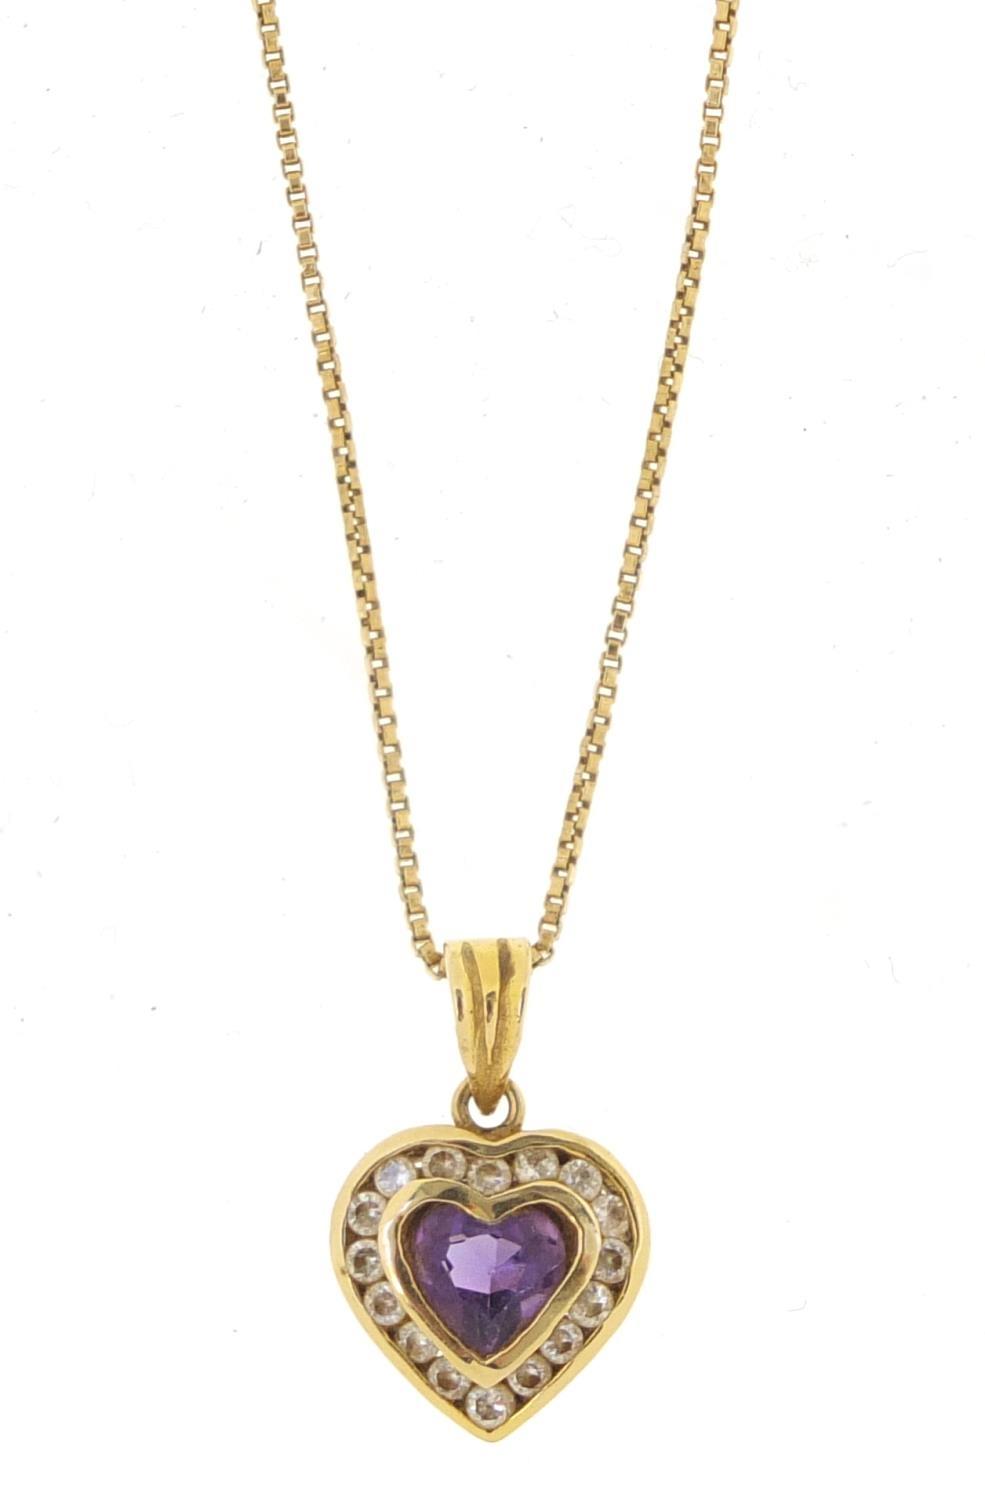 14ct gold amethyst and clear stone love heart pendant, 2cm in length on an unmarked gold coloured - Image 2 of 5